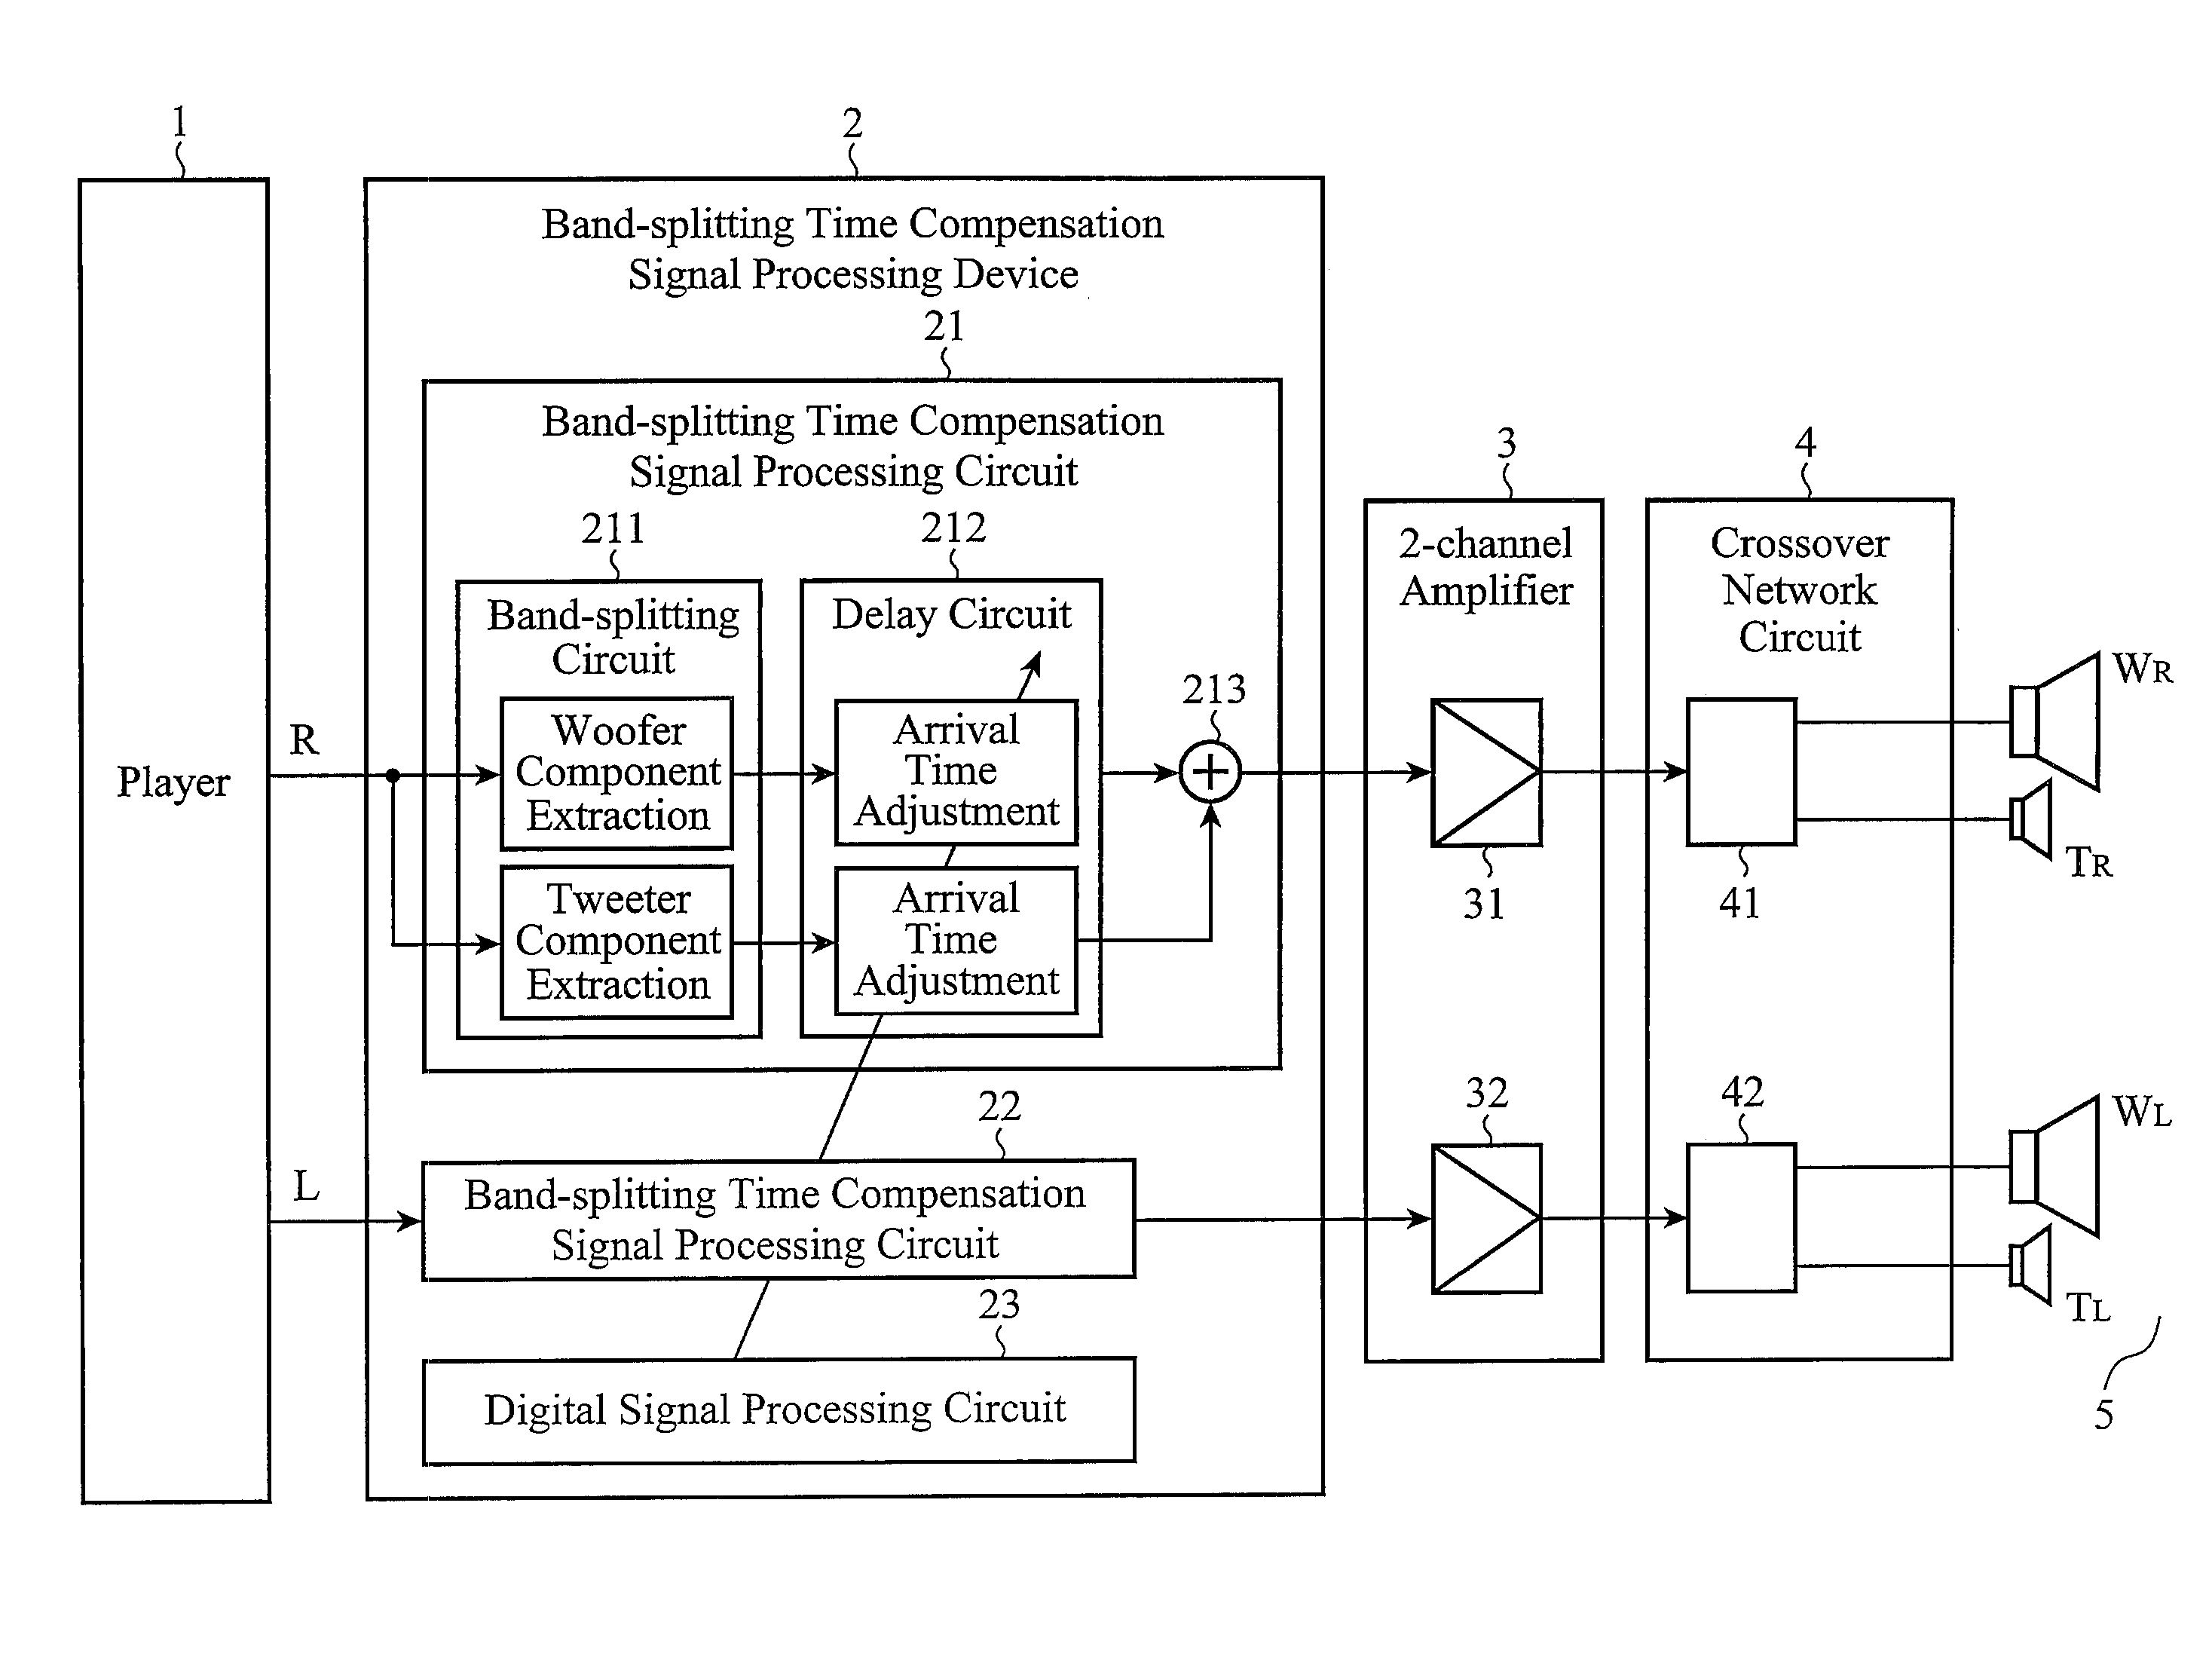 Band-splitting time compensation signal processing device